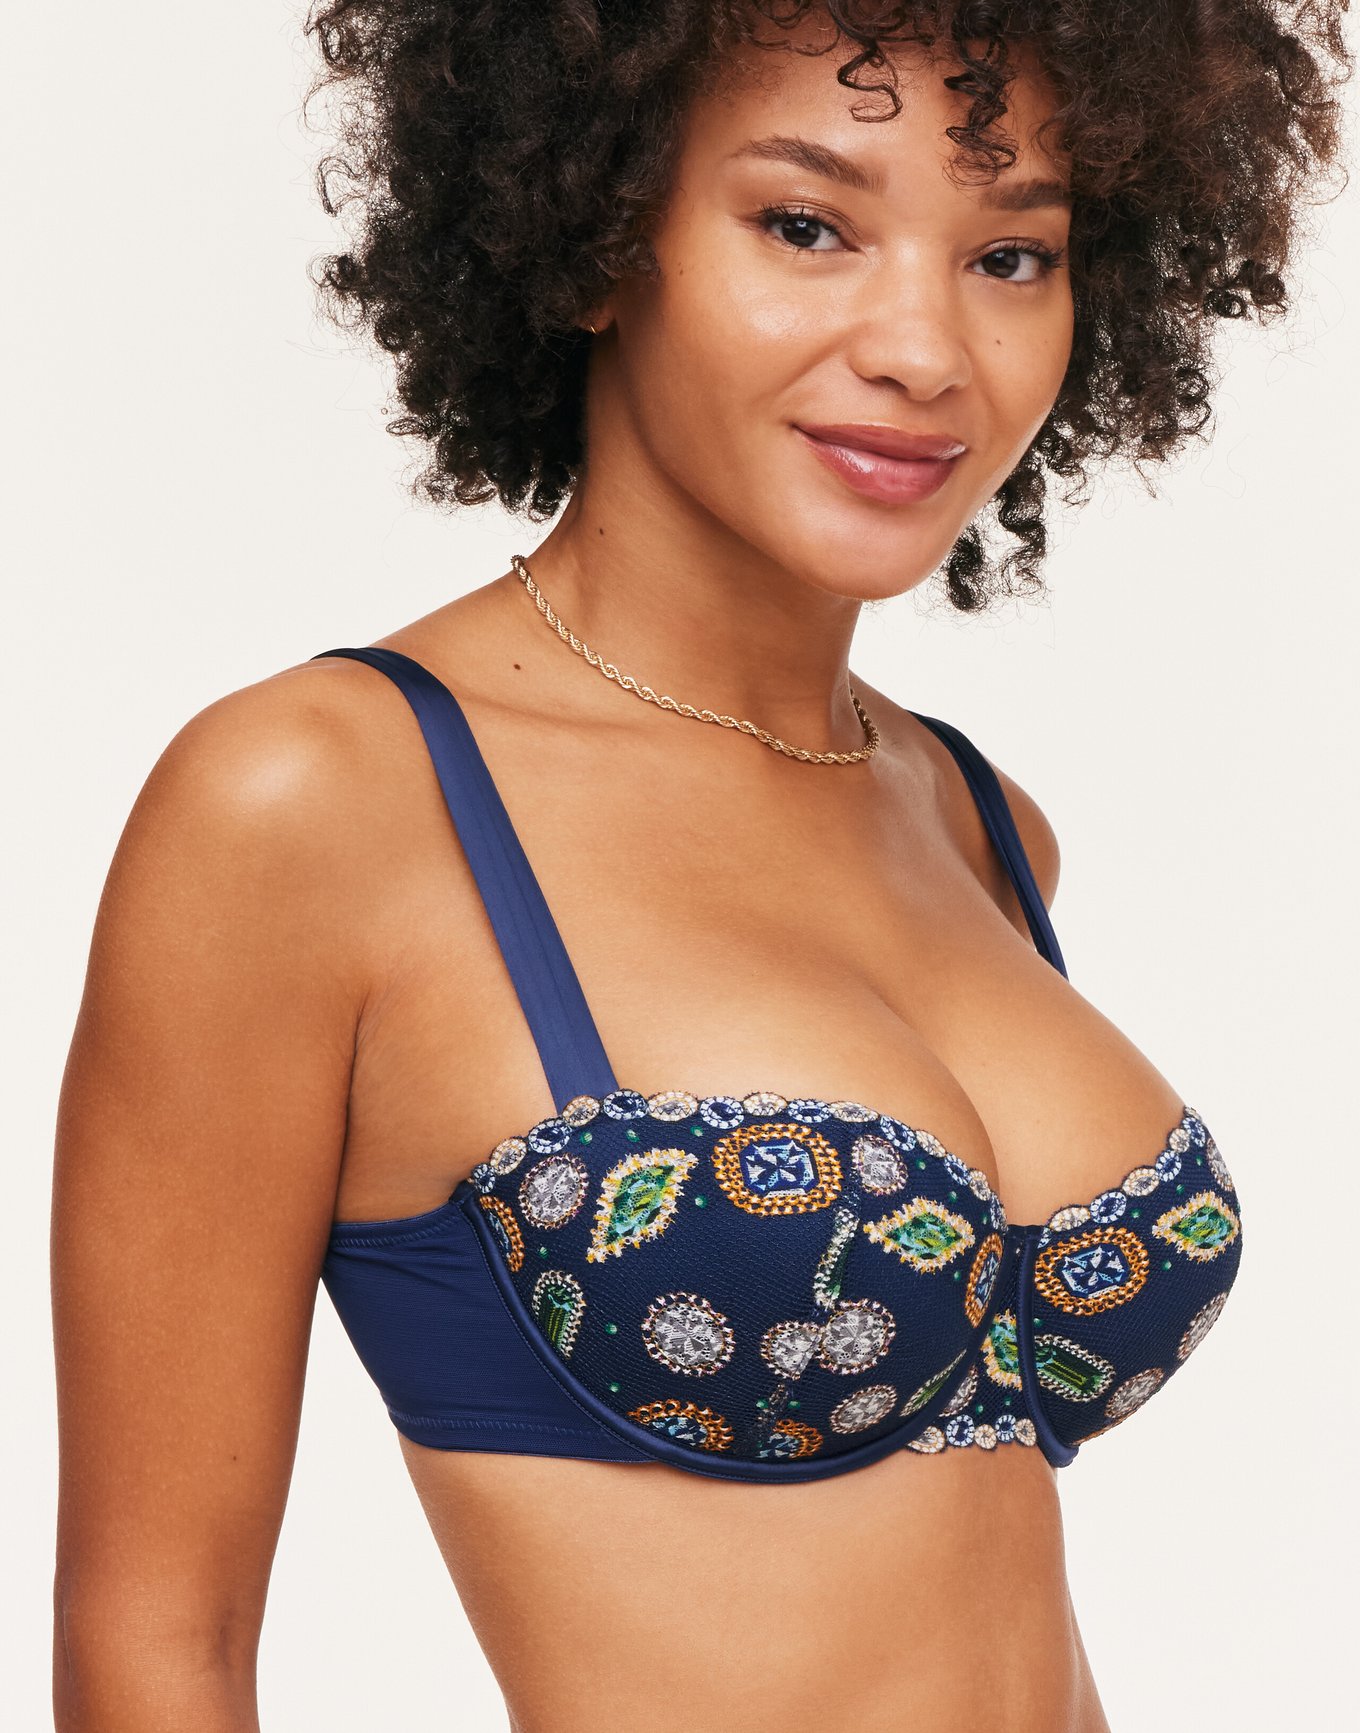 NEW Floral 44 G / 44G Underwire Molded Cup Full Coverage Balconette Bra  ADORE ME on eBid Ireland